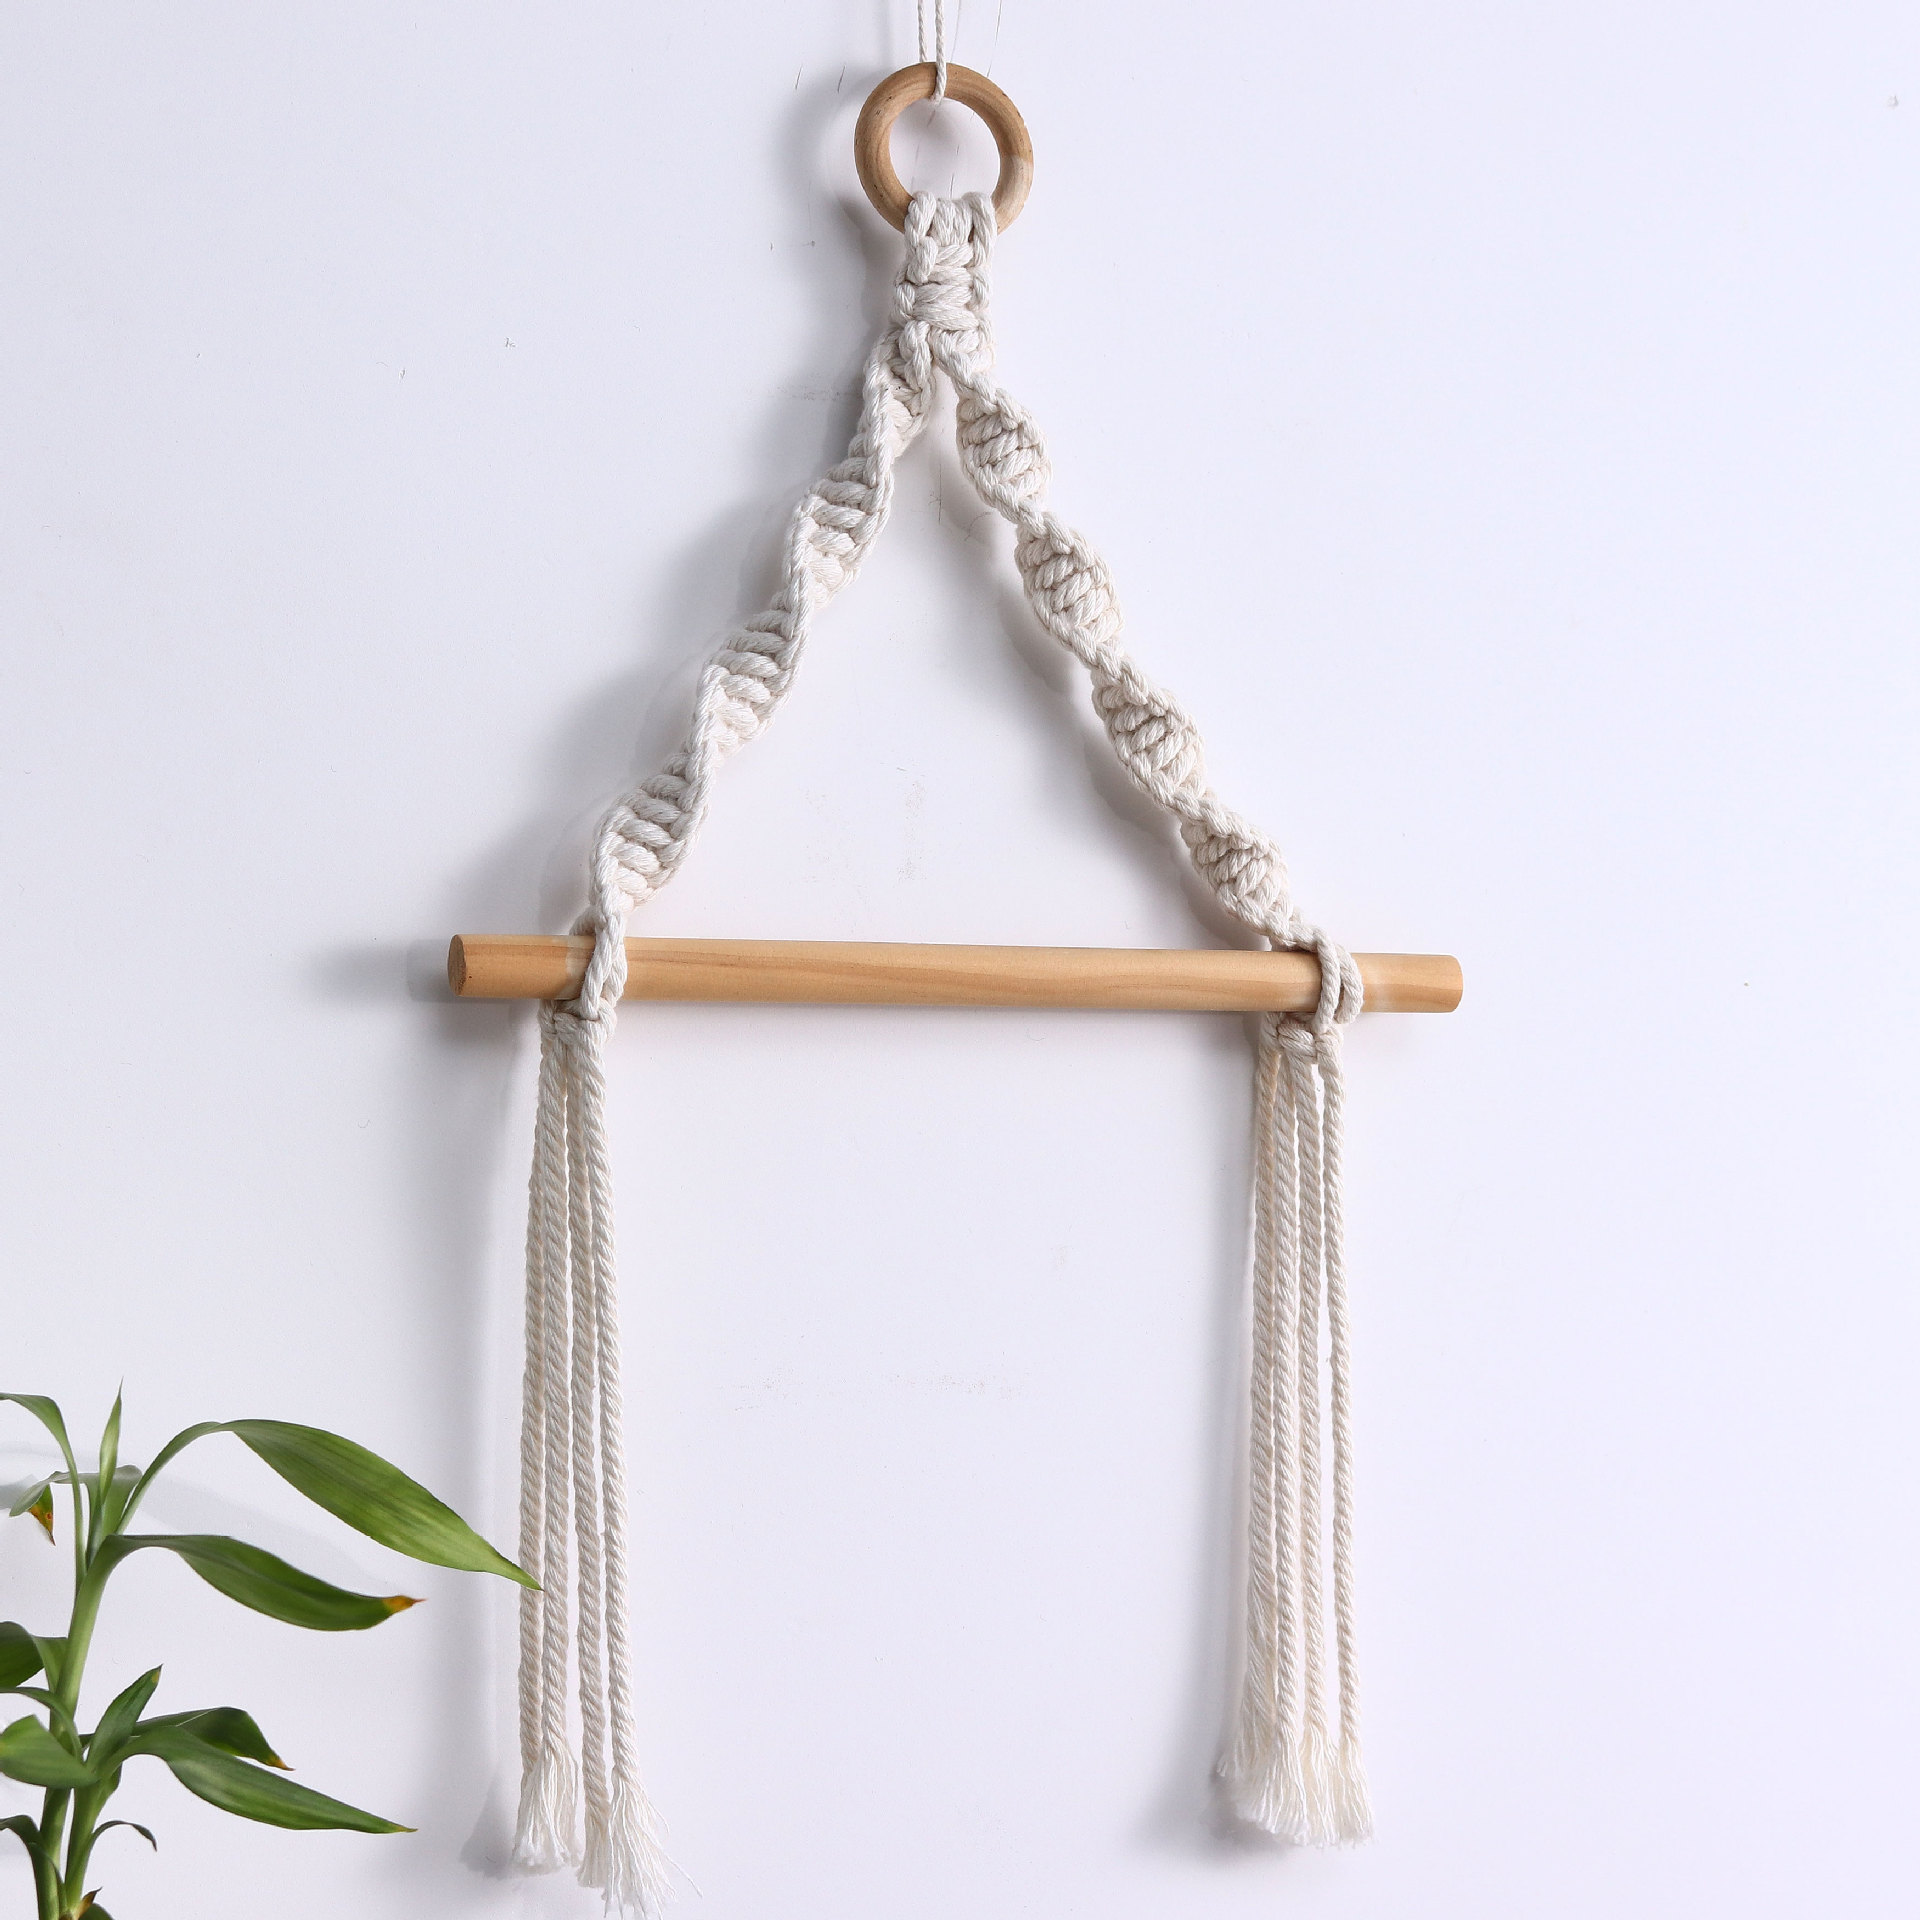 Ins Style Home Decoration Mini Tapestry Hand-Woven Cotton Cord Tapestry B & B Living Room Bedroom Decor